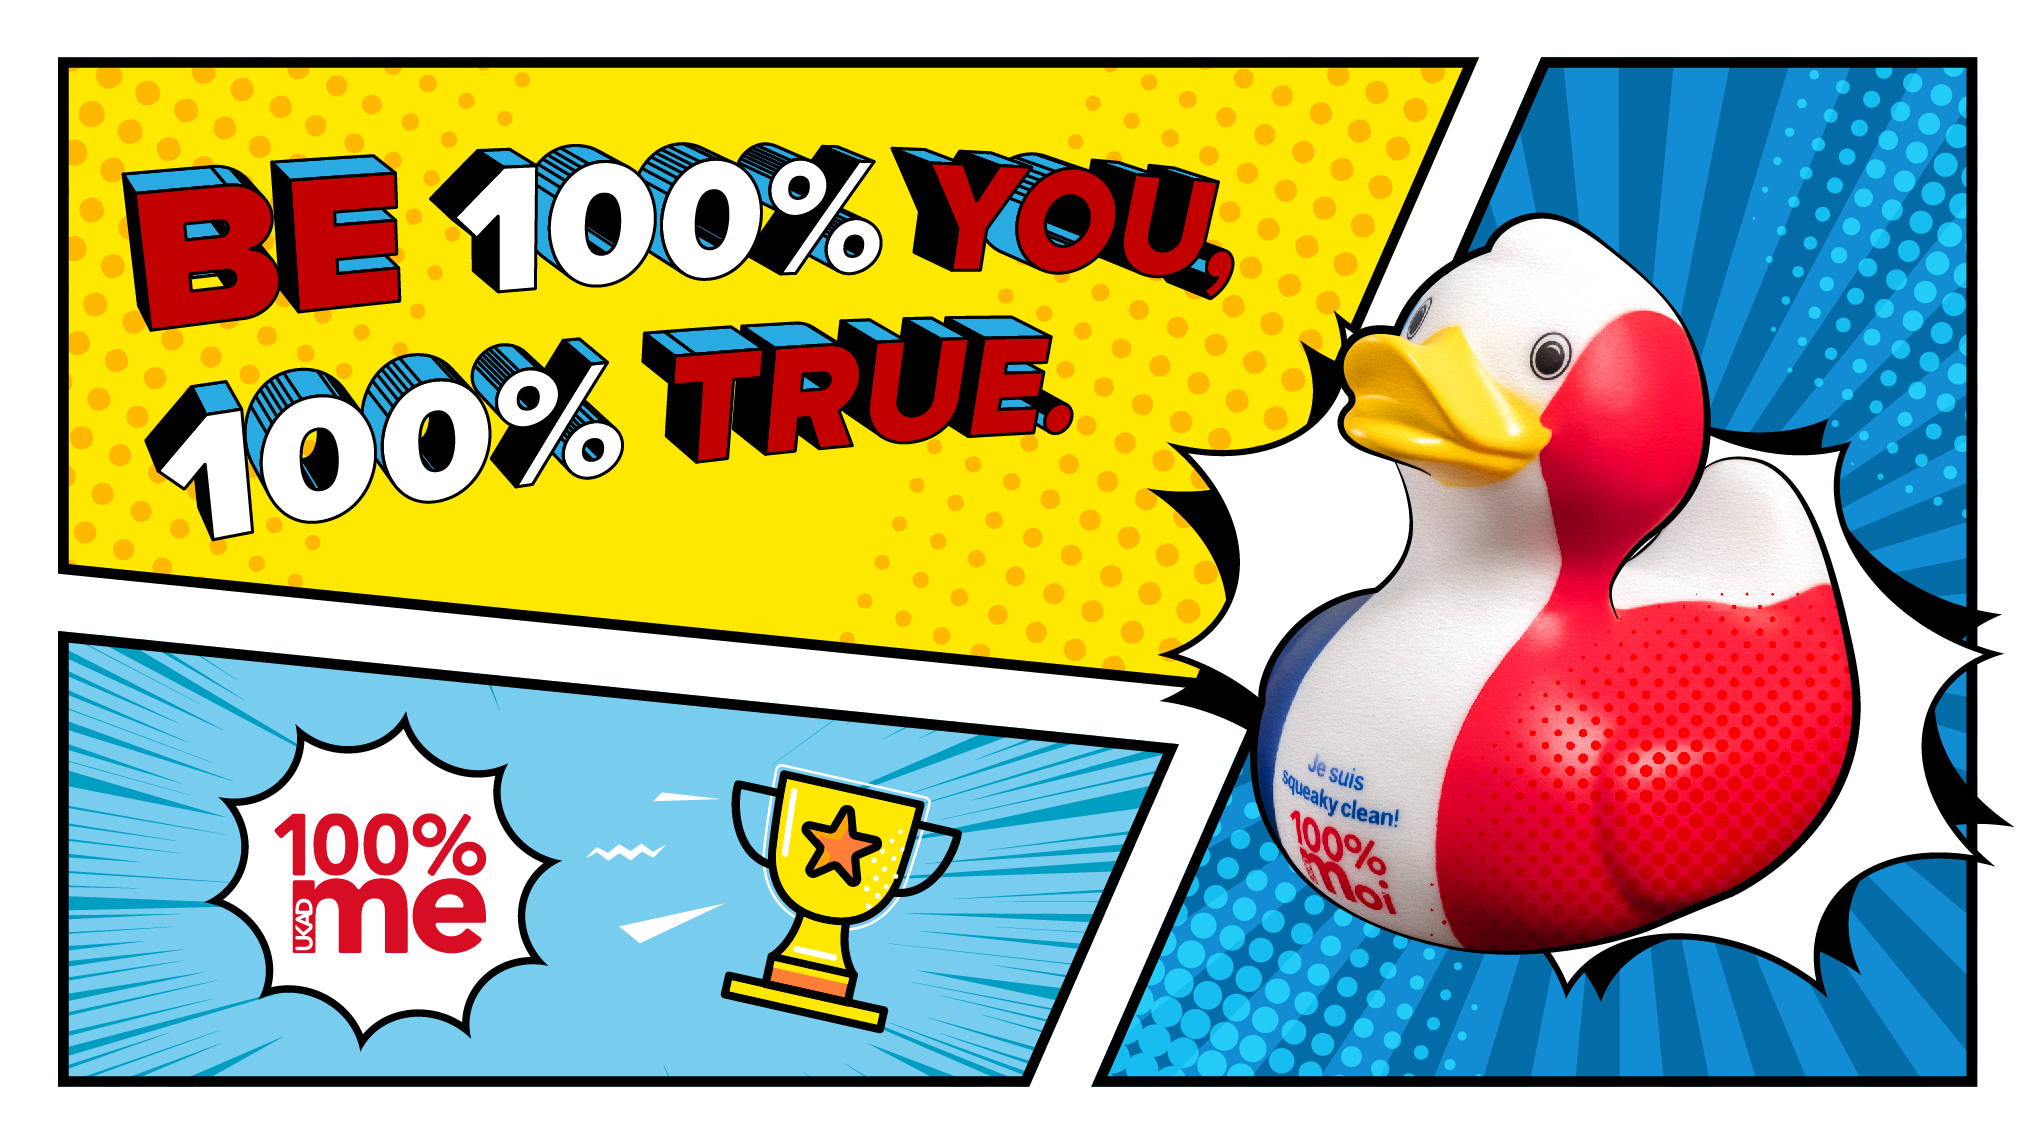 Be 100% you 100& true pop art style banner with squeaky the duck